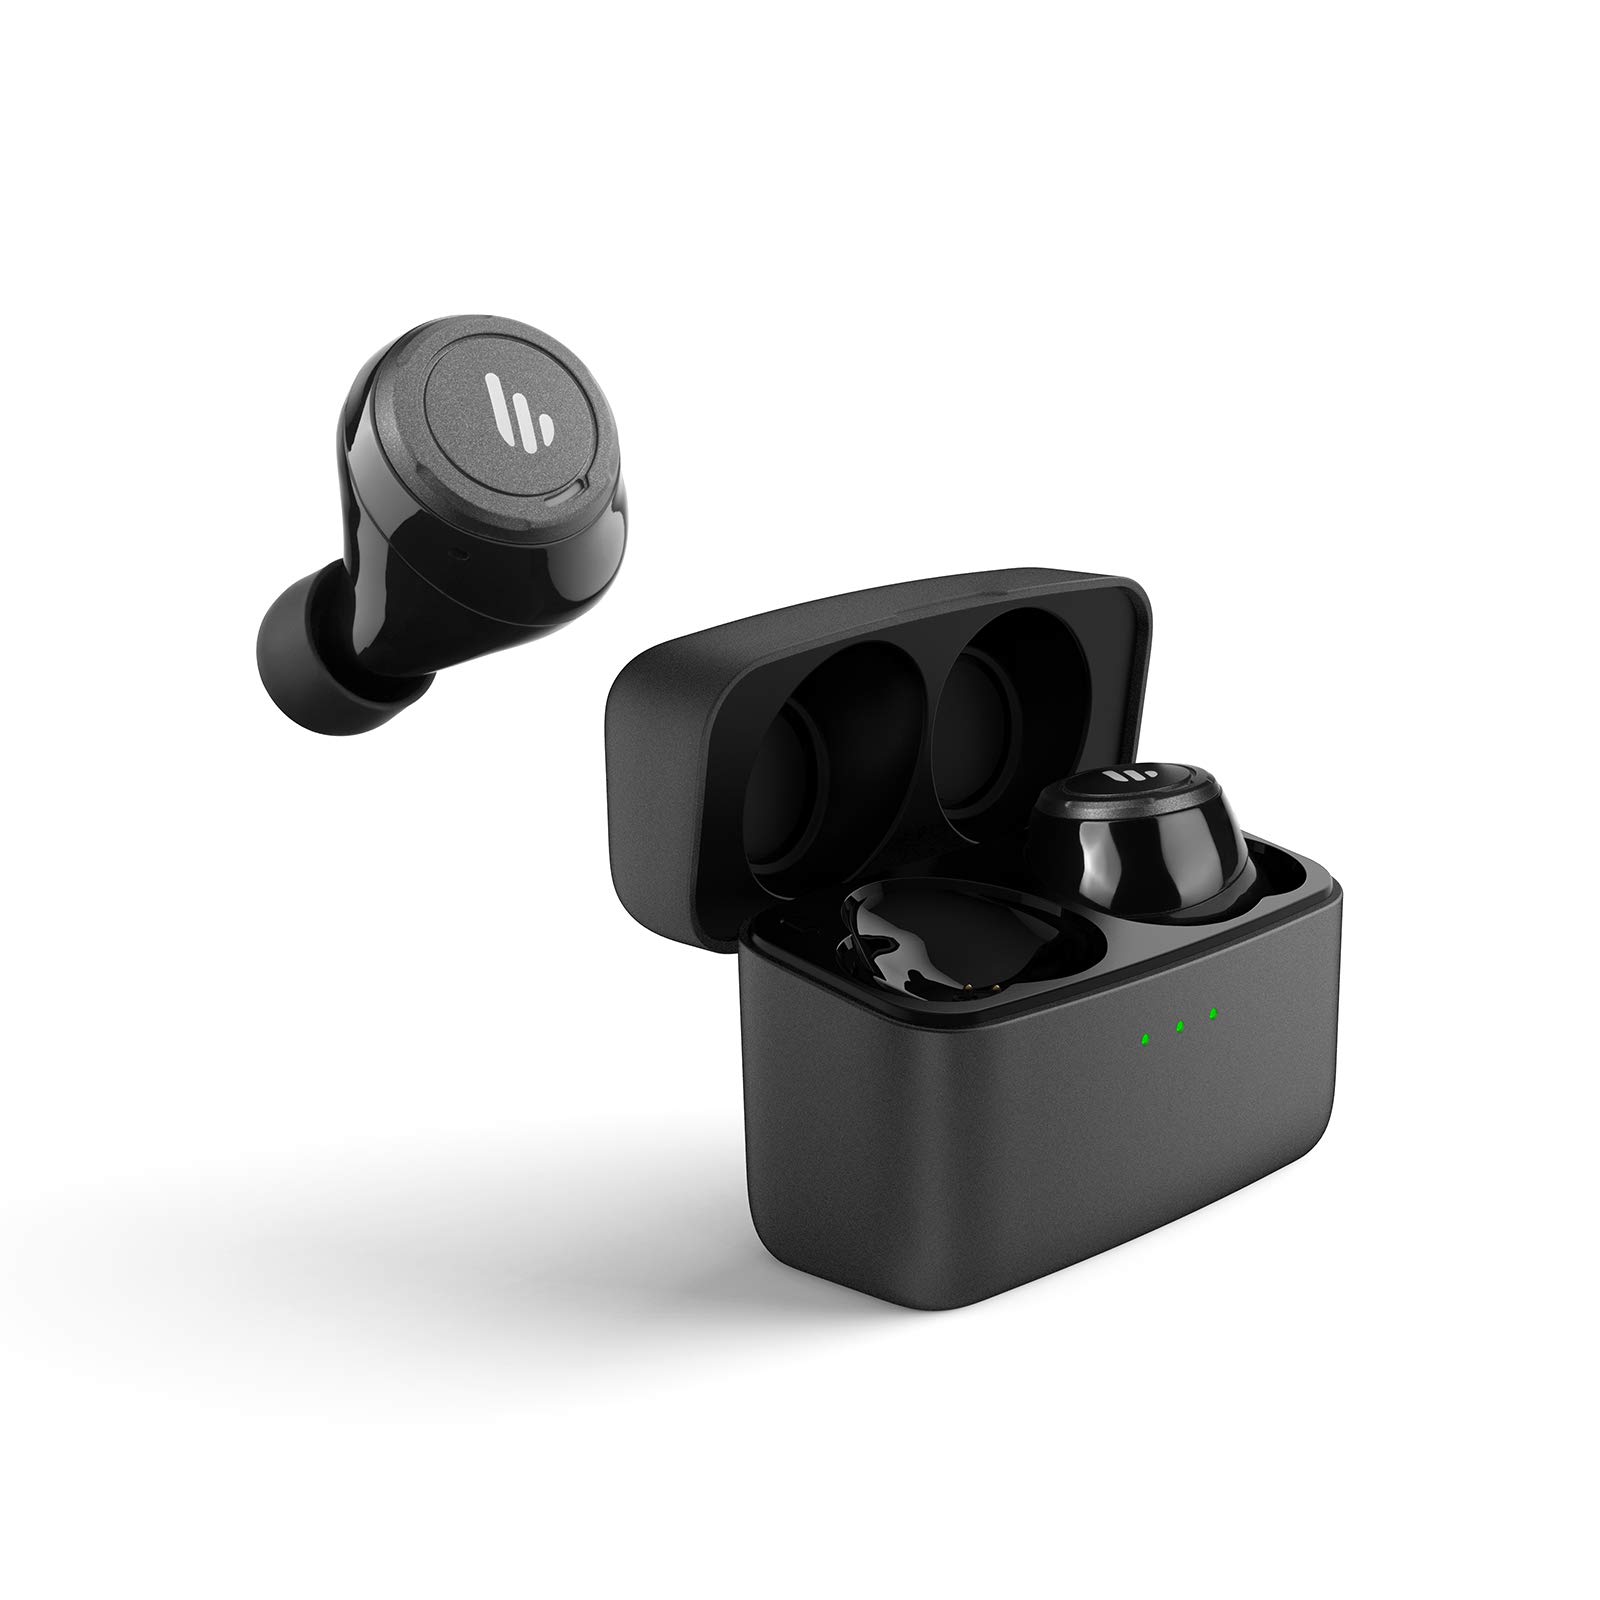 Edifier TWS5 True Wireless Earbuds - Up to 32 Hour Battery Life with Mic and Charging Case, Bluetooth v5.0 aptX, IPX5 Splash & Sweatproof, Easy Pai...